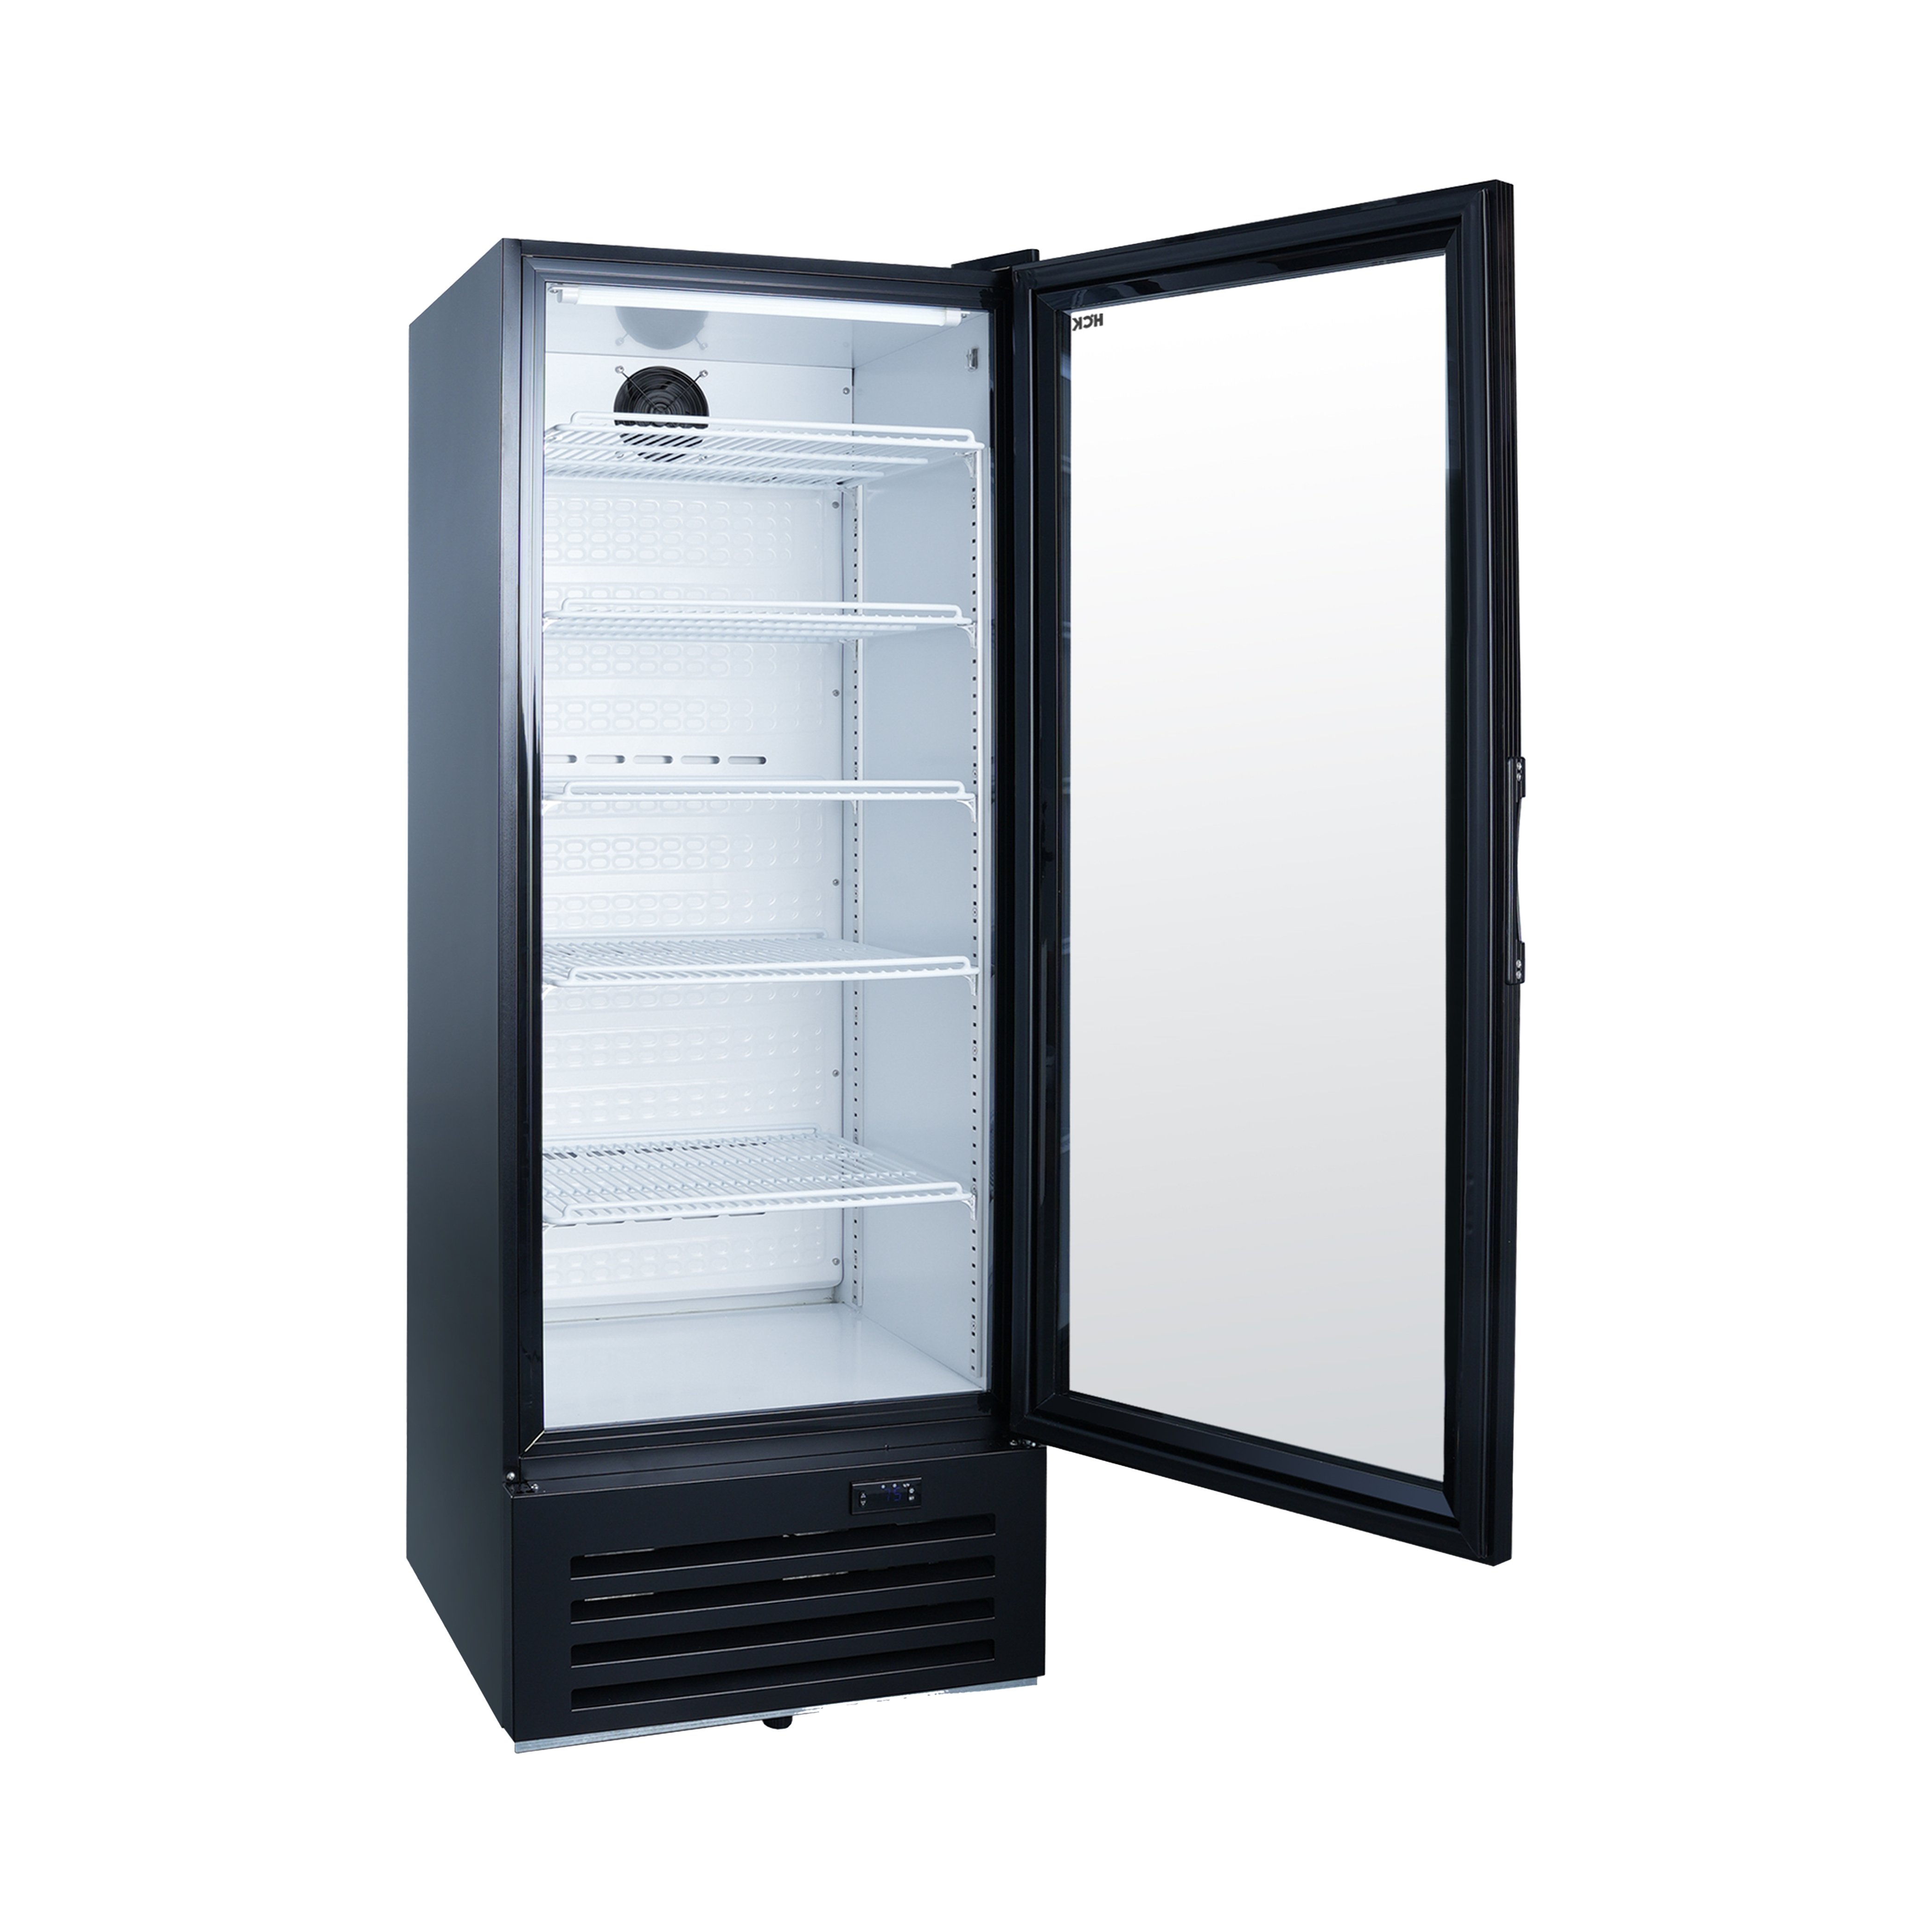 The side view of 10 Cu Ft Single Zone Compact Beverage Fridge with open door, displaying 5 shelf spaces inside